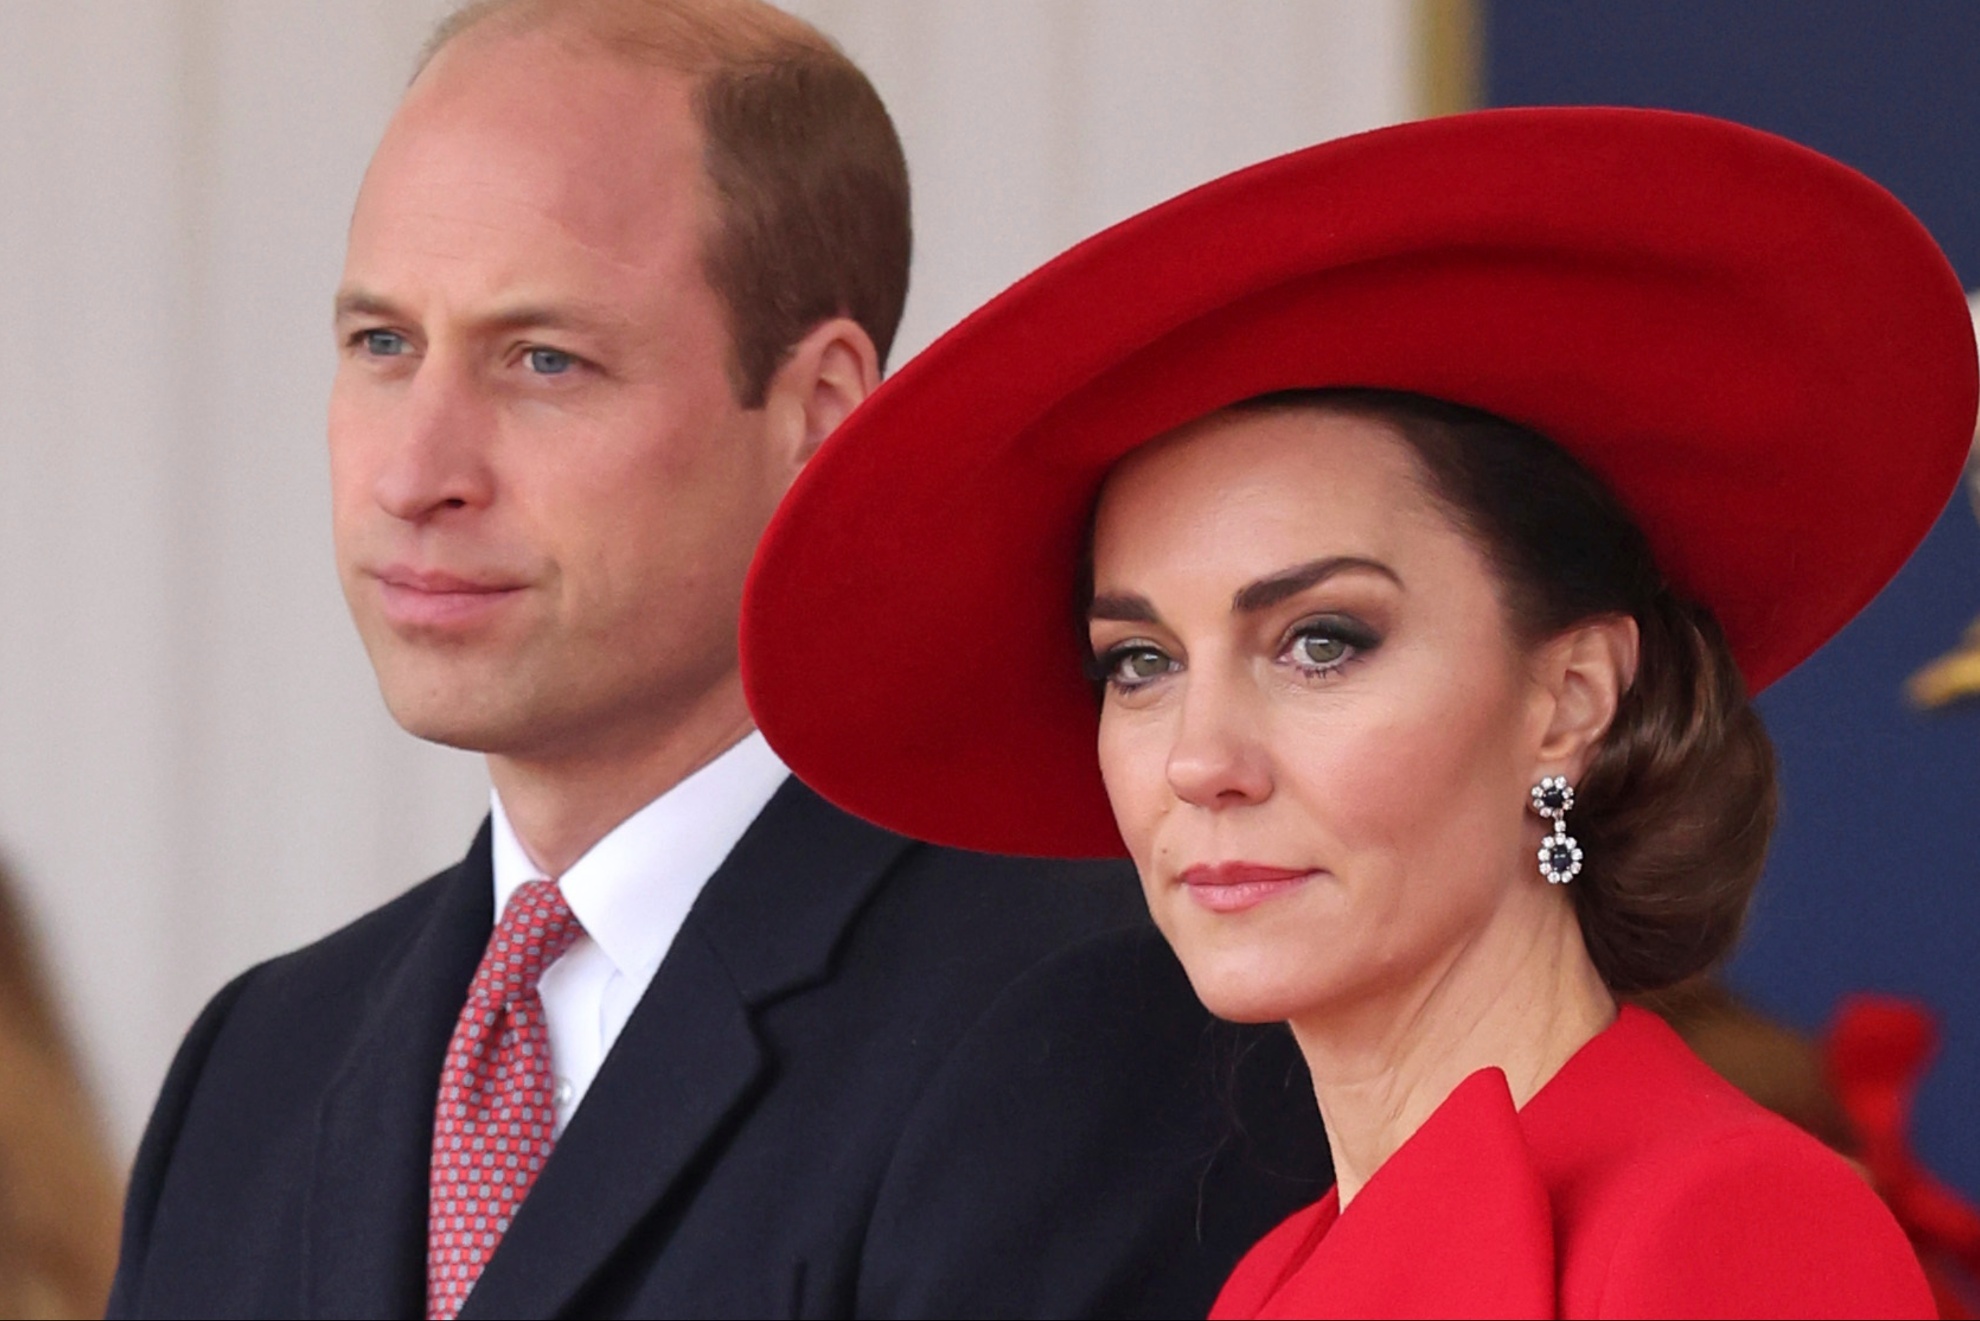 The Prince and Princess of Wales, William and Catherine.